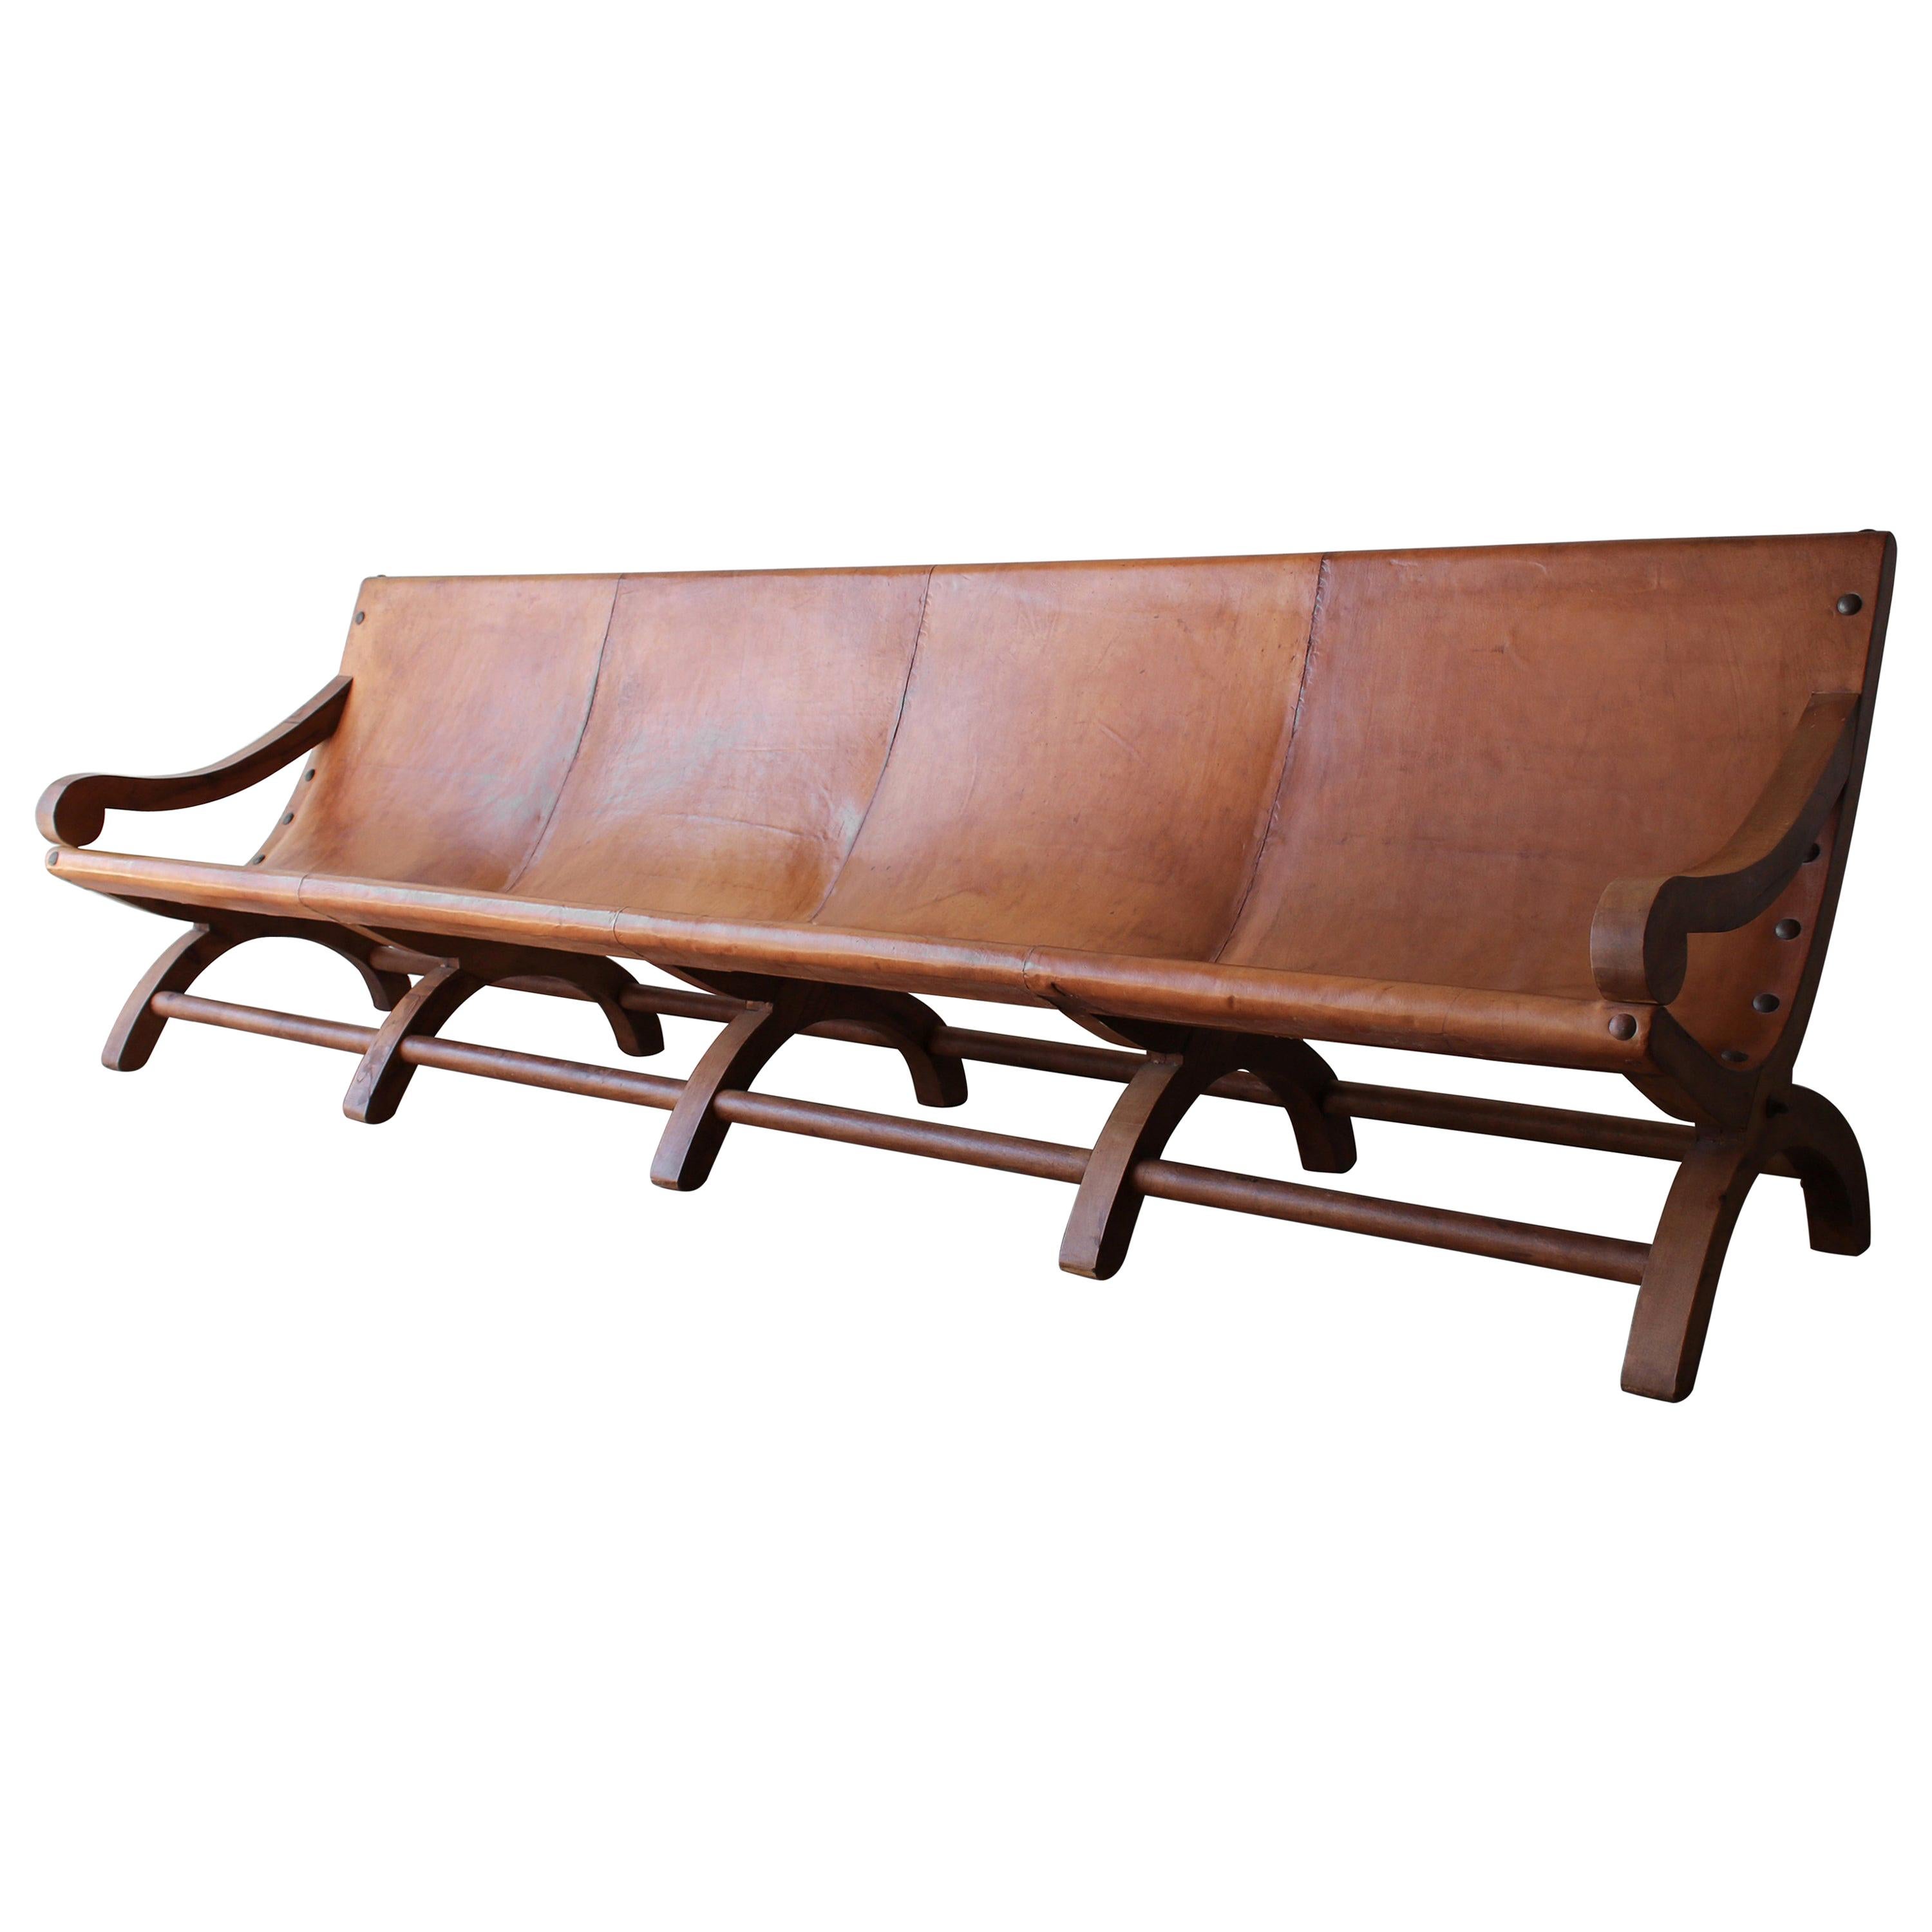 Vintage Butaque Mexican Leather Sling Sofa